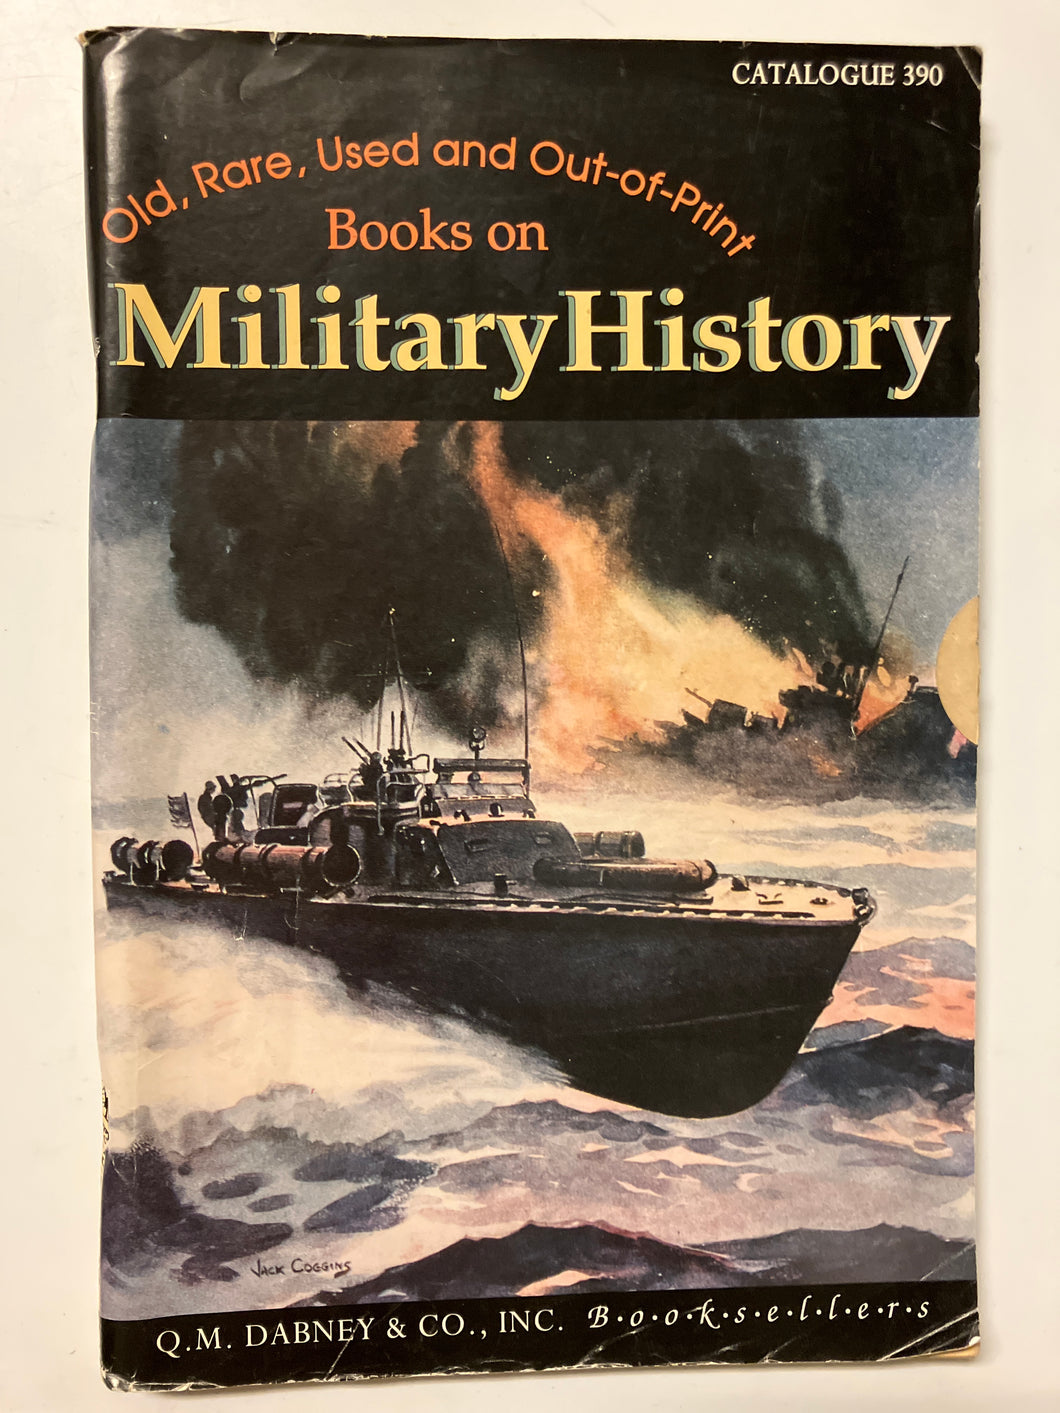 Old, Used and Rare Books on Military History Catalogue 390 - Slick Cat Books 